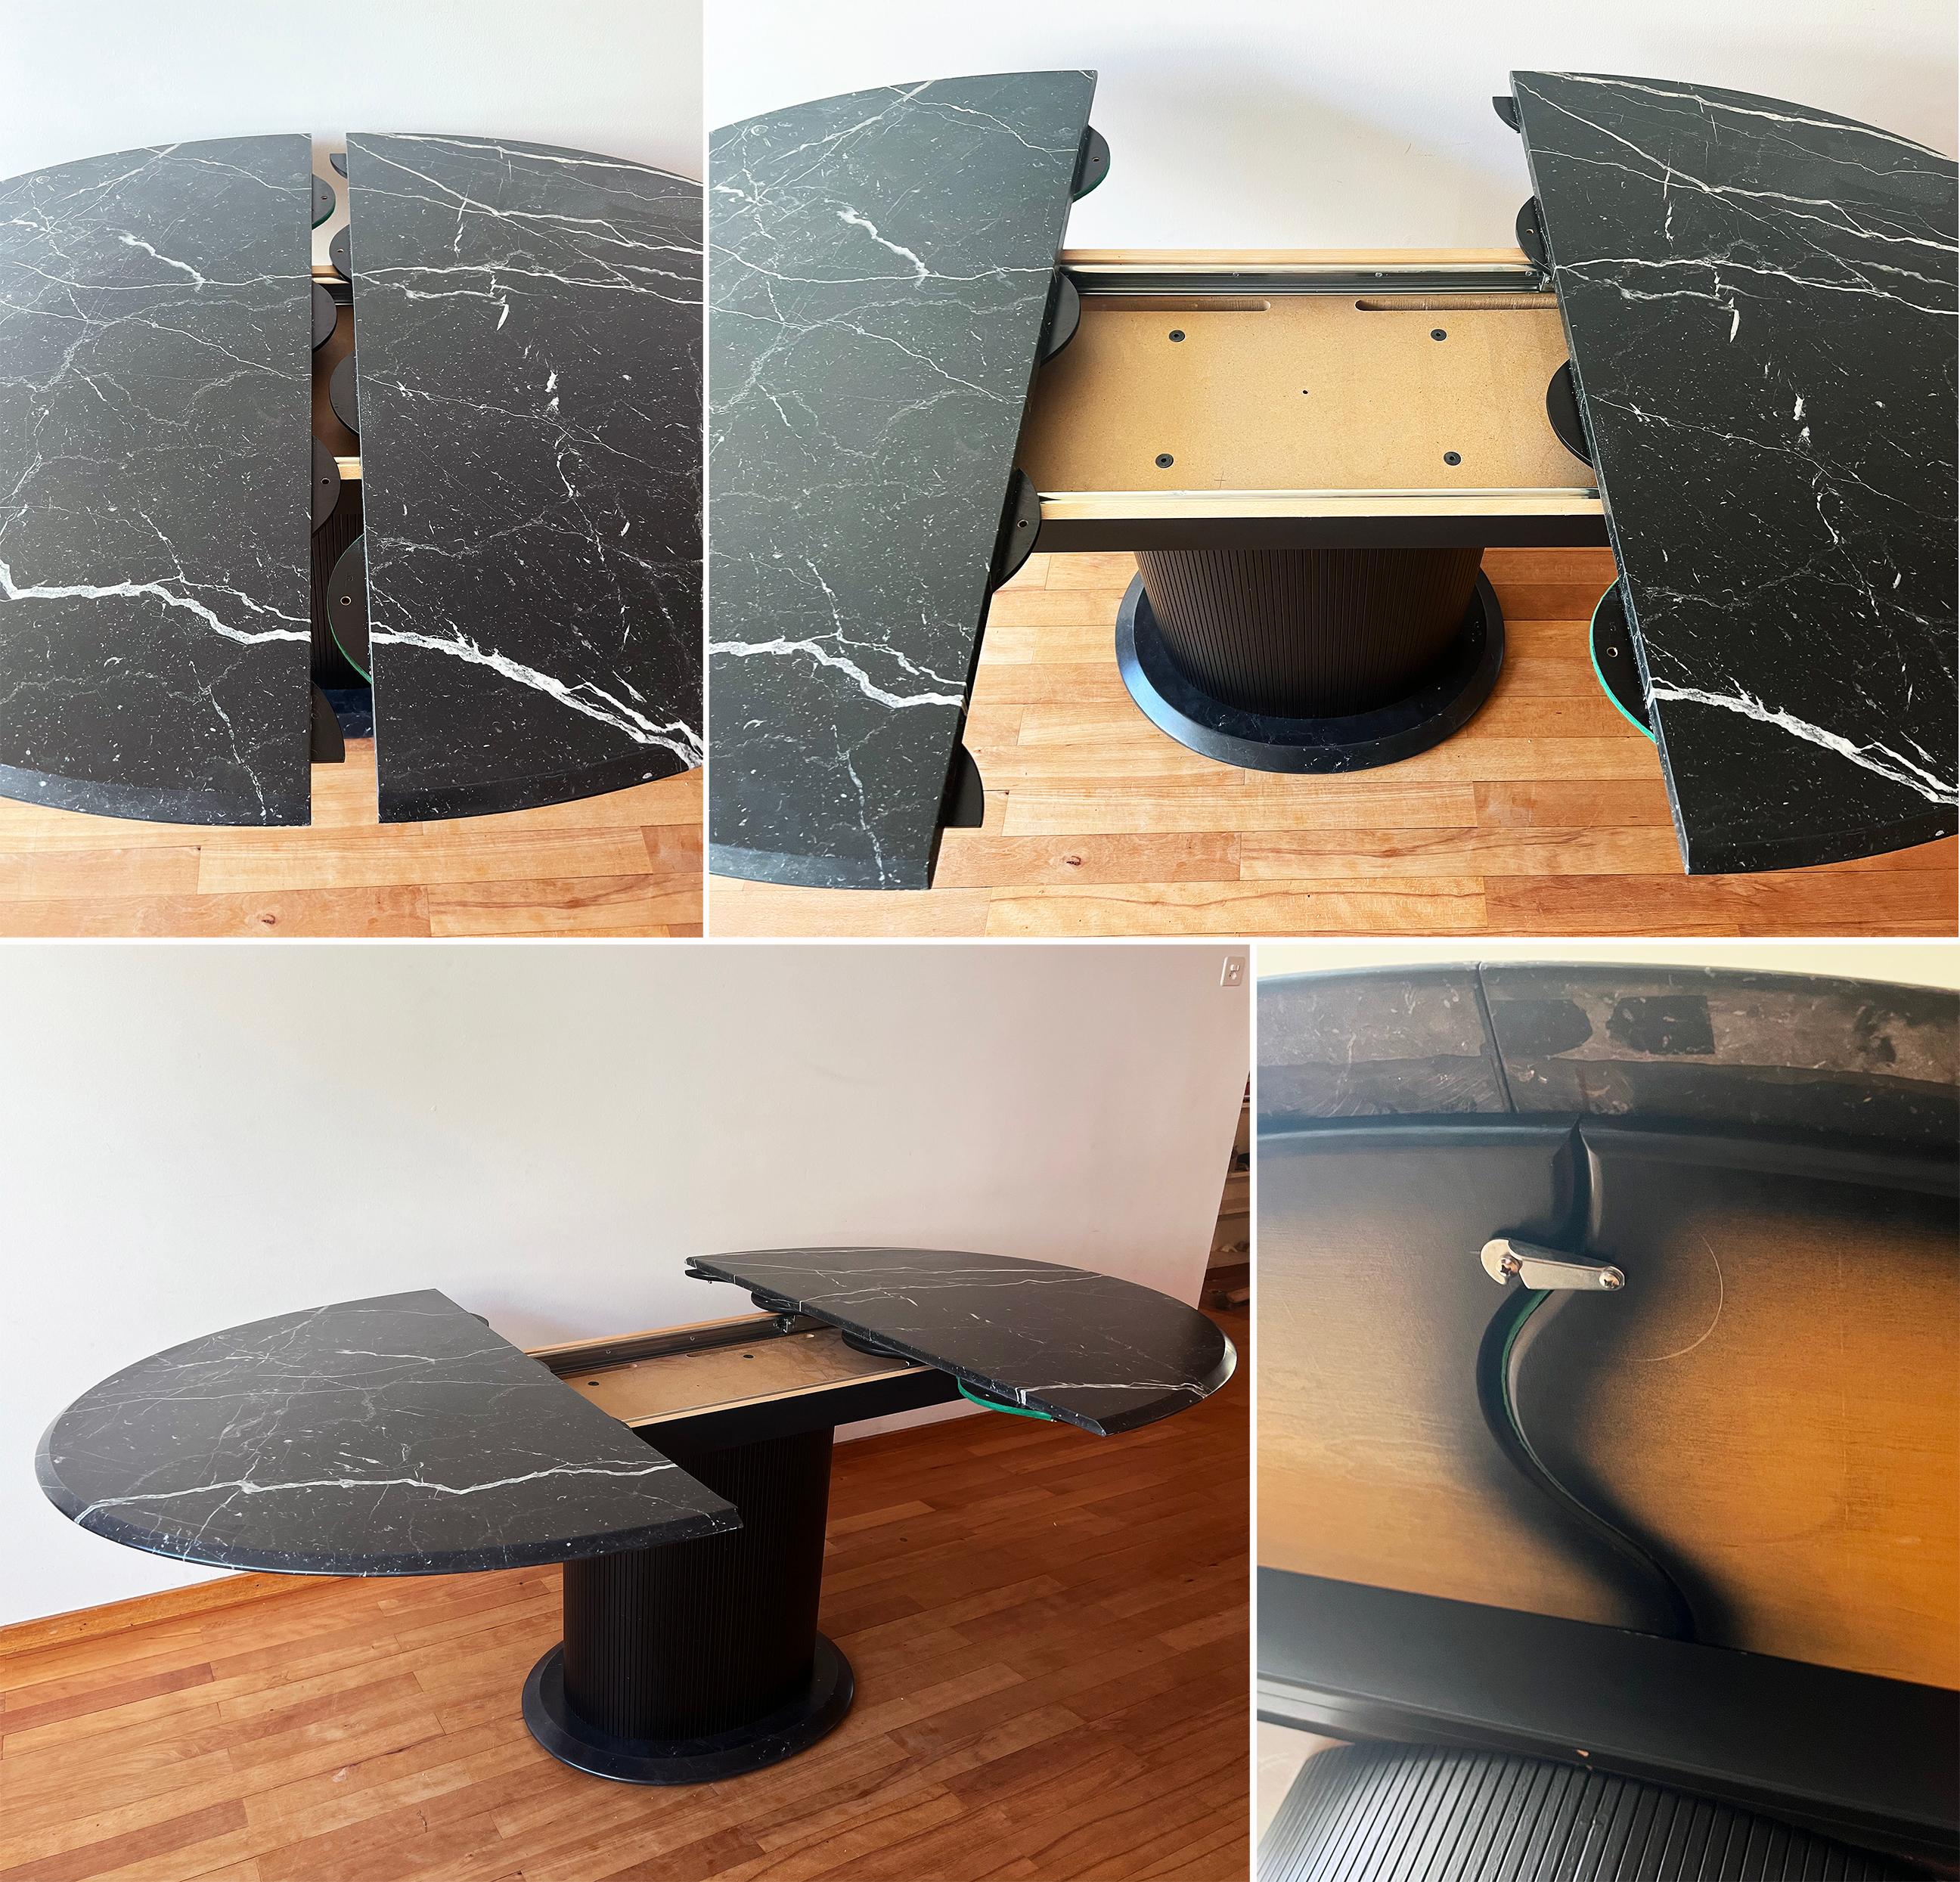 Incredible Postmodern 1980s Italian Marble Table with Ebonized Lacquered Wooden base and the same style lacquered wooden table leaf extension for the table.  This piece is versatile and a rare design. It is GORGEOUS in person!!

Gorgeous marbled